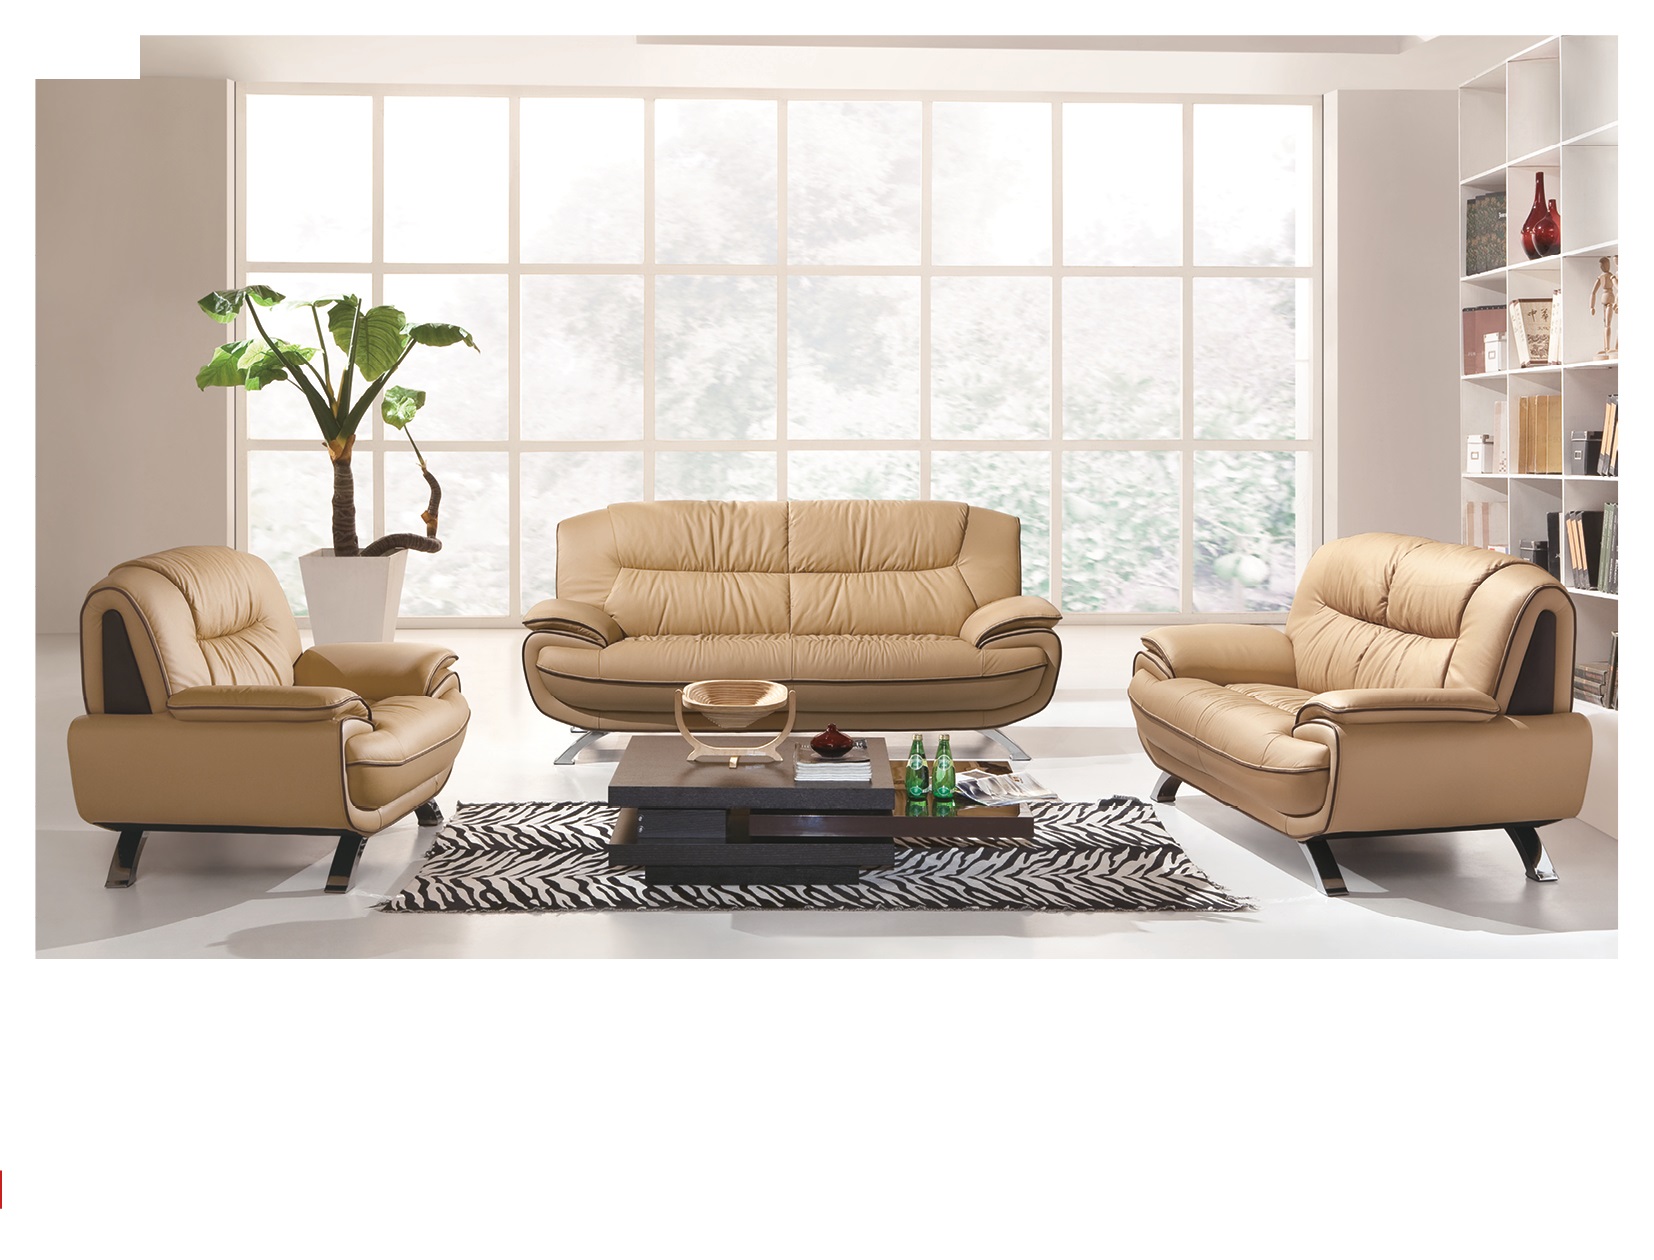 Living Room Furniture Sofas Loveseats and Chairs 405 Beige/Brown